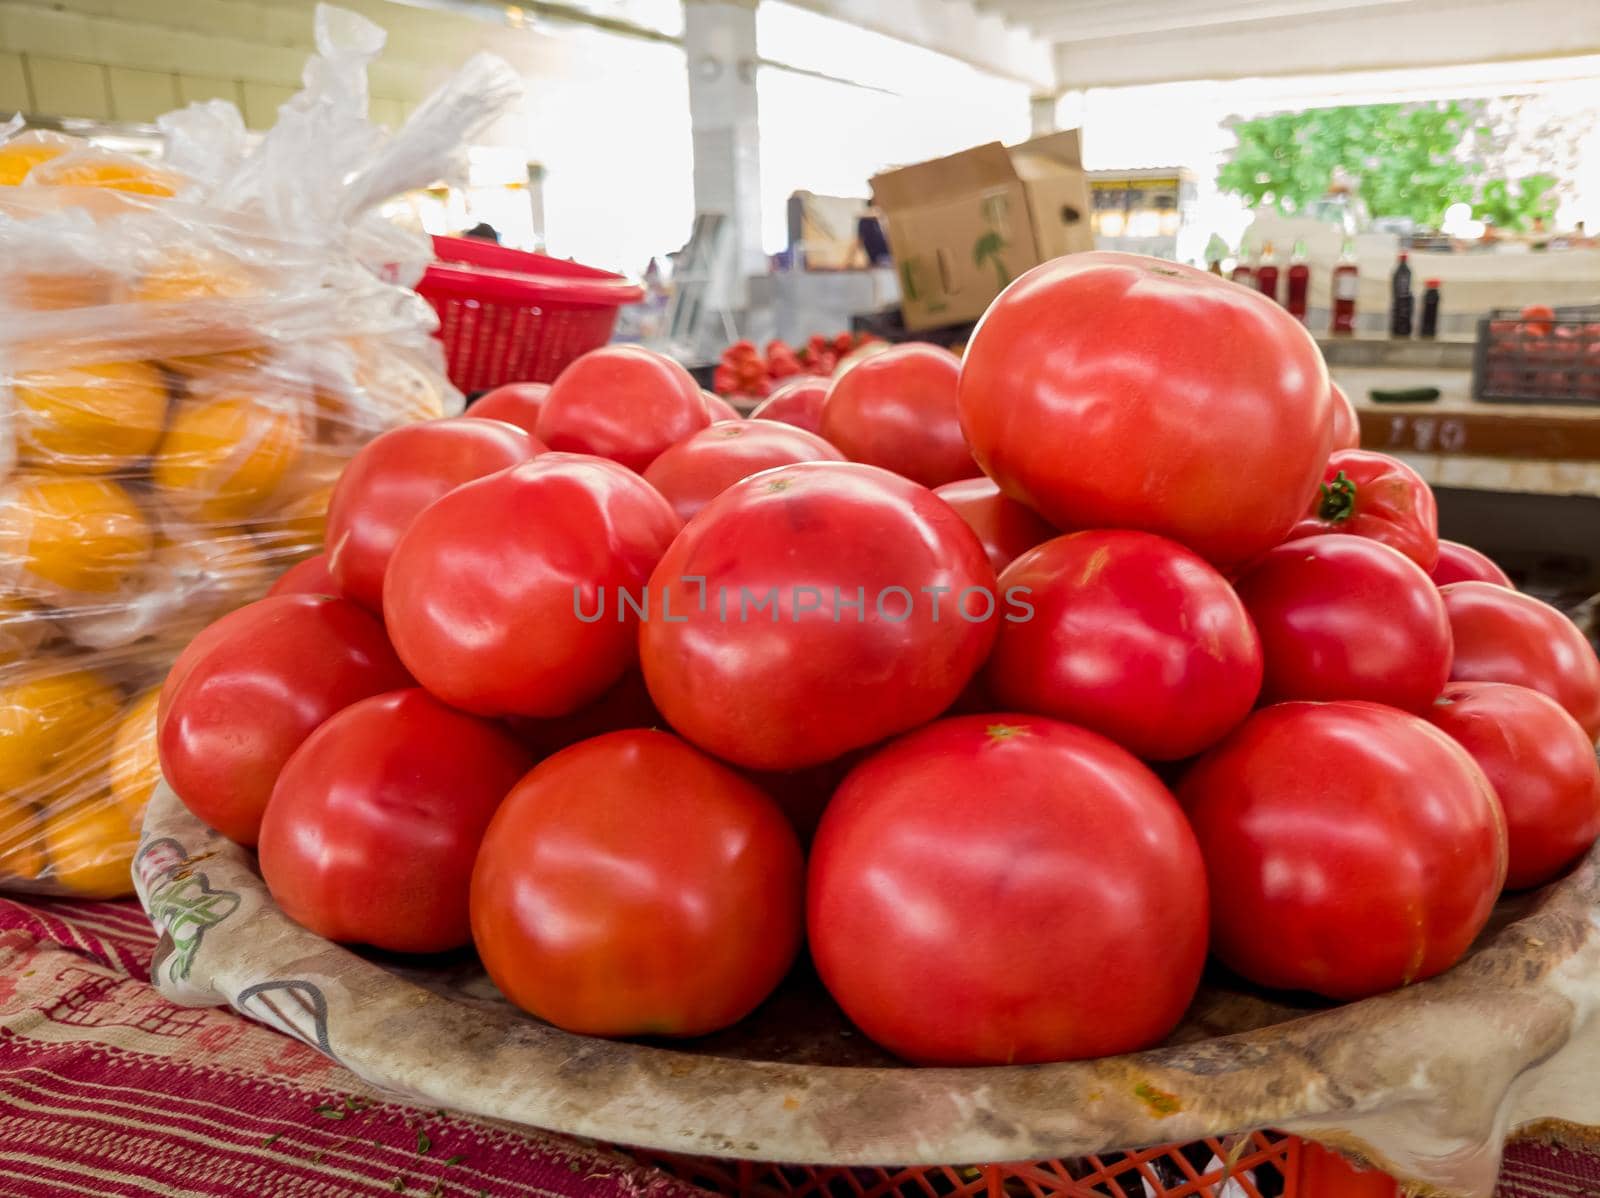 Street market with vegetables and fruits. Shopping for a bazaar. Counter with tomatoes by Milanchikov